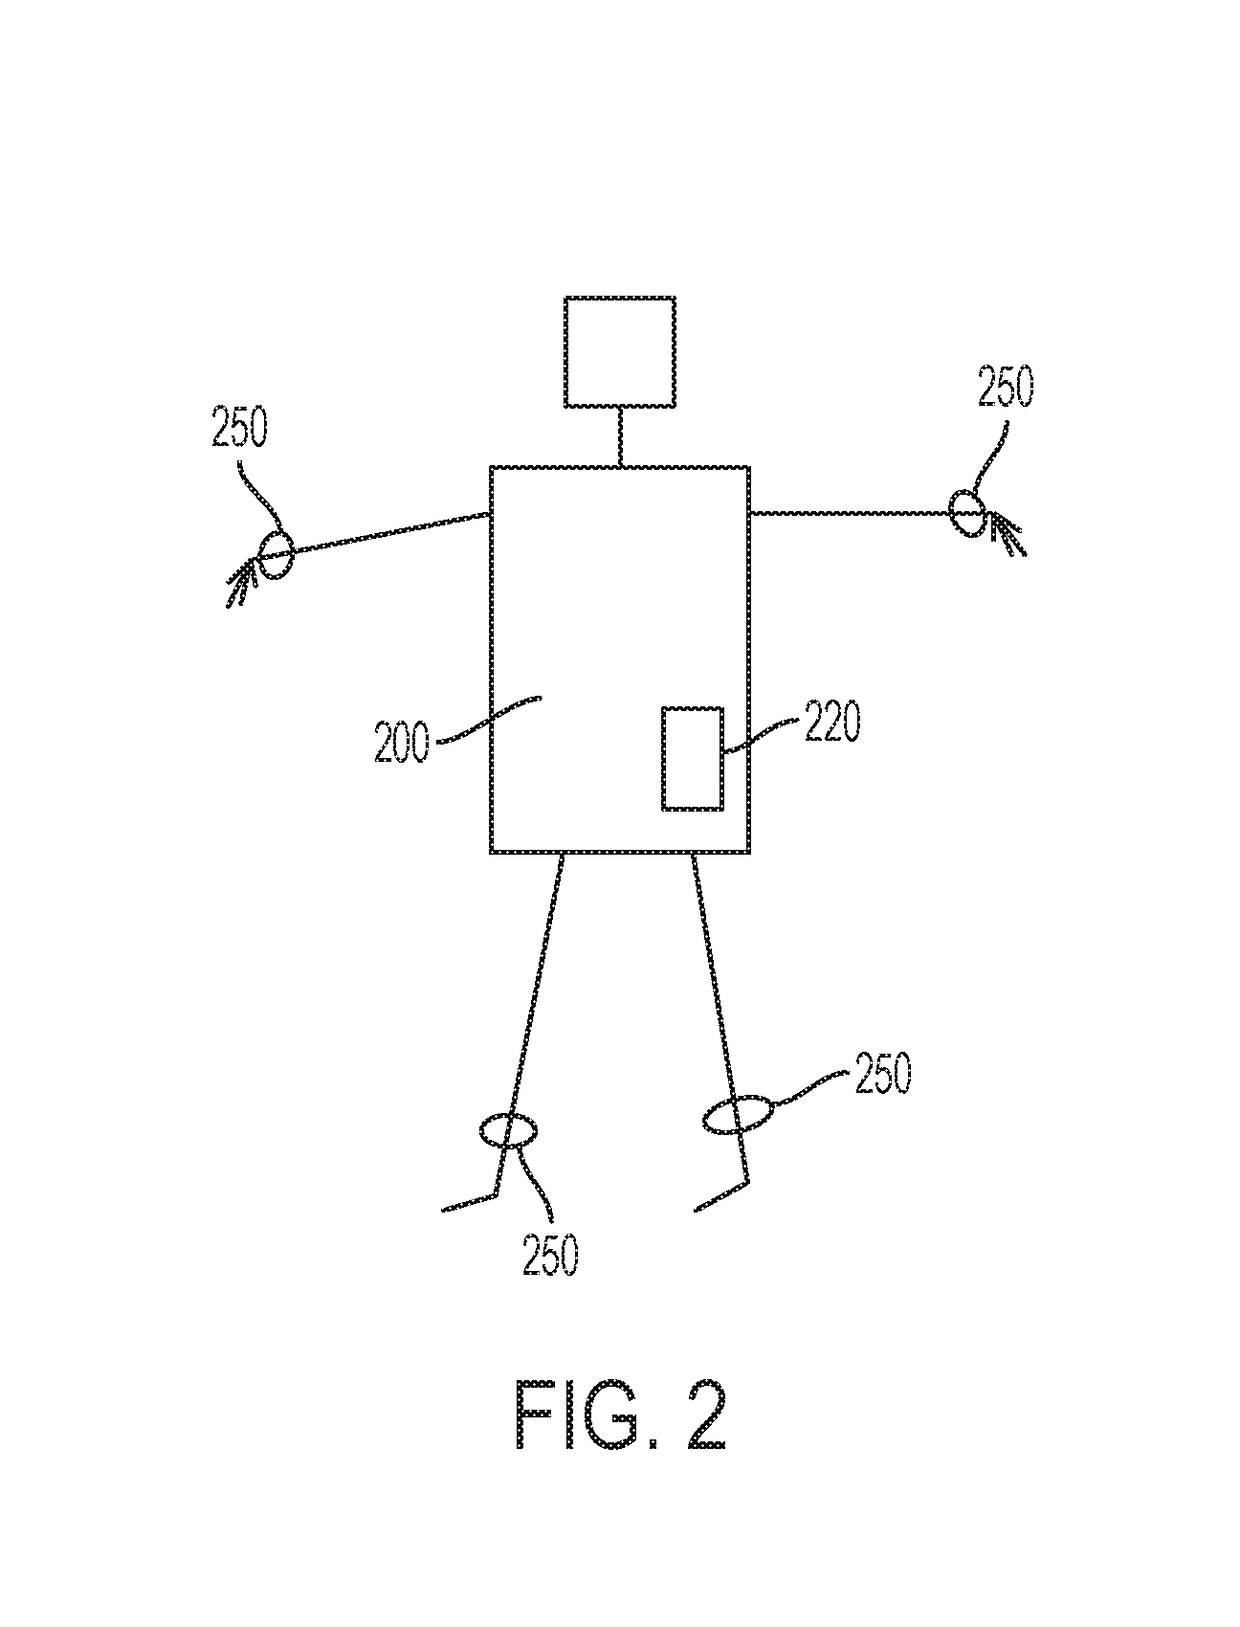 Method and system for motion analysis and fall prevention